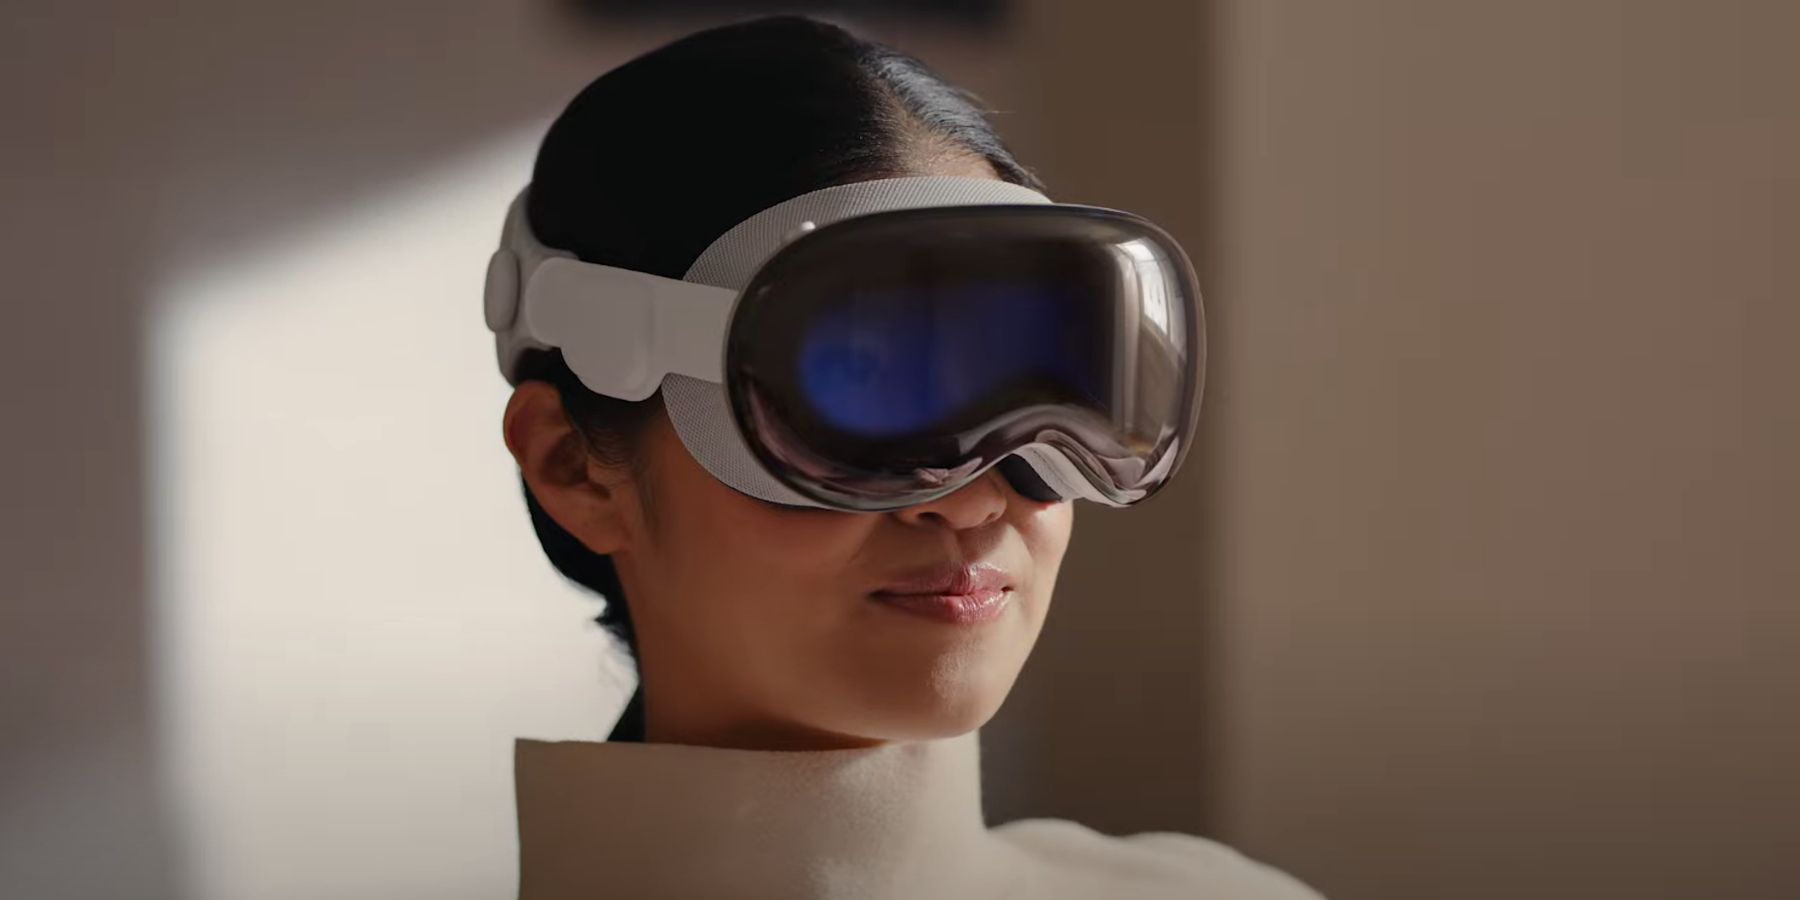 apple vision pro wearable augmented/virtual reality device